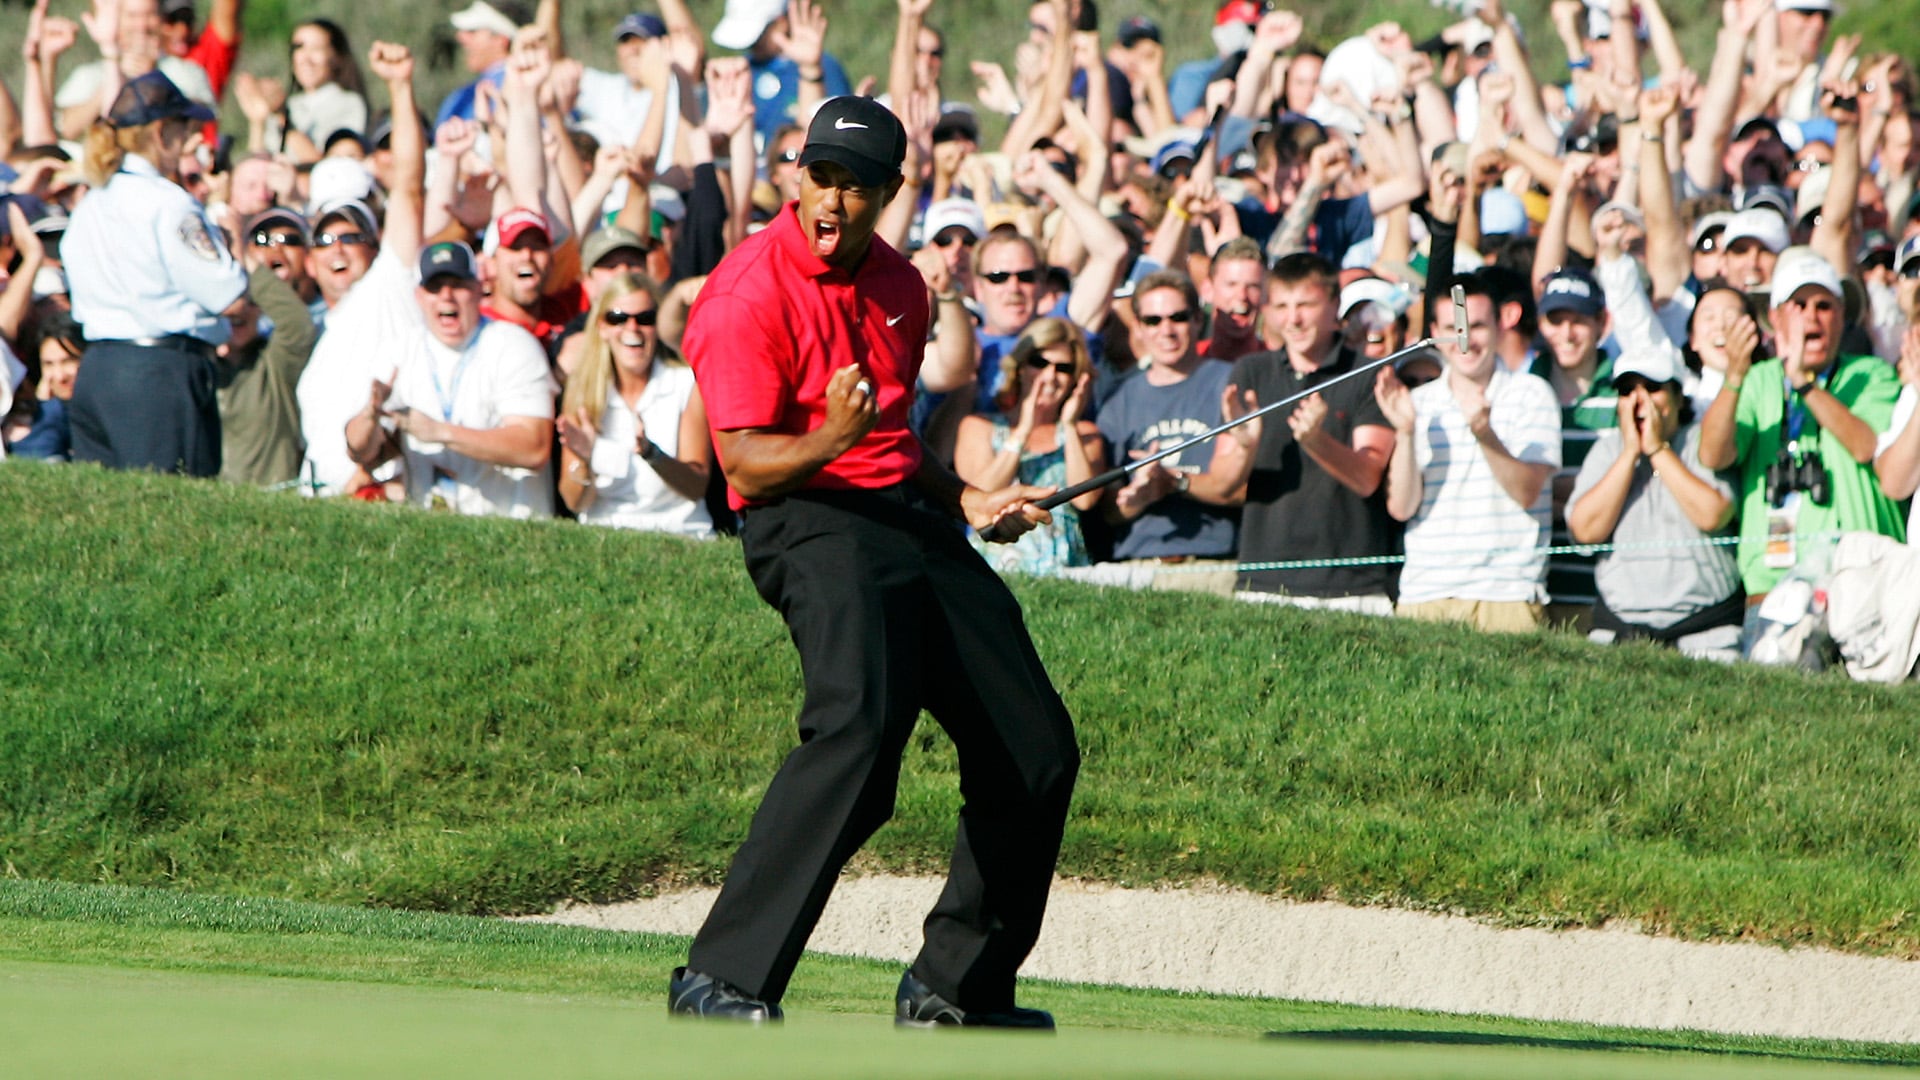 Ahead of the Hero World Challenge, relive Tiger Woods’ 10 most heroic shots